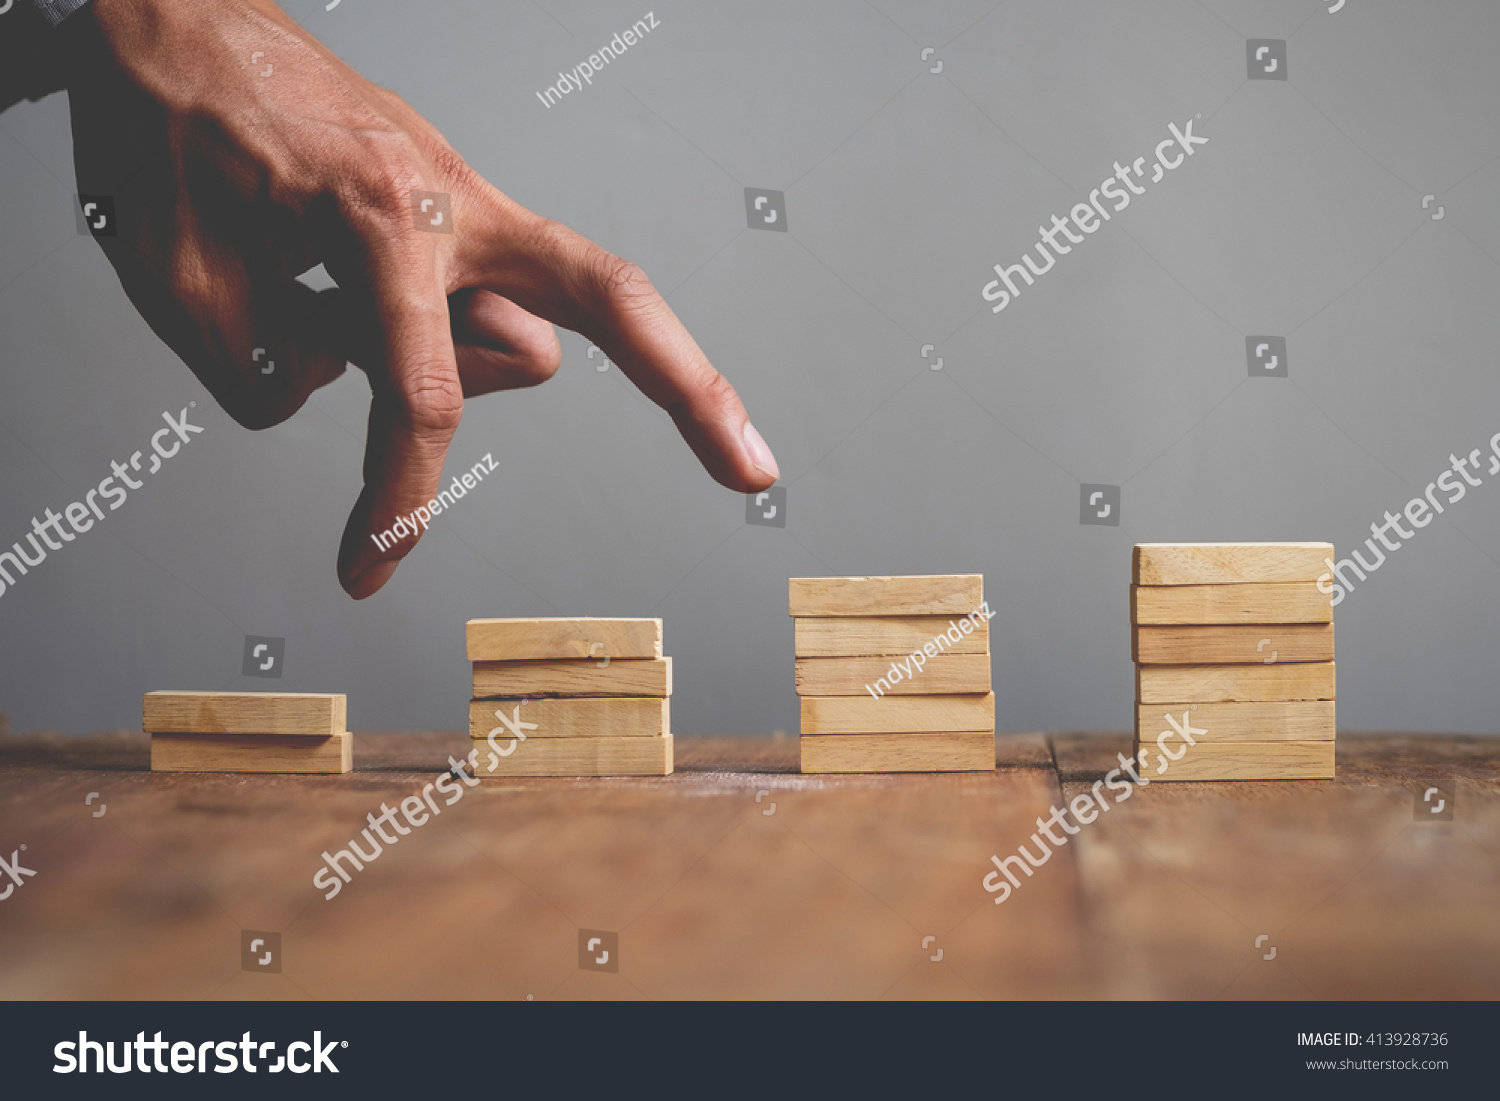 Hand liken business person jump a toy staircase to success, business concept #413928736